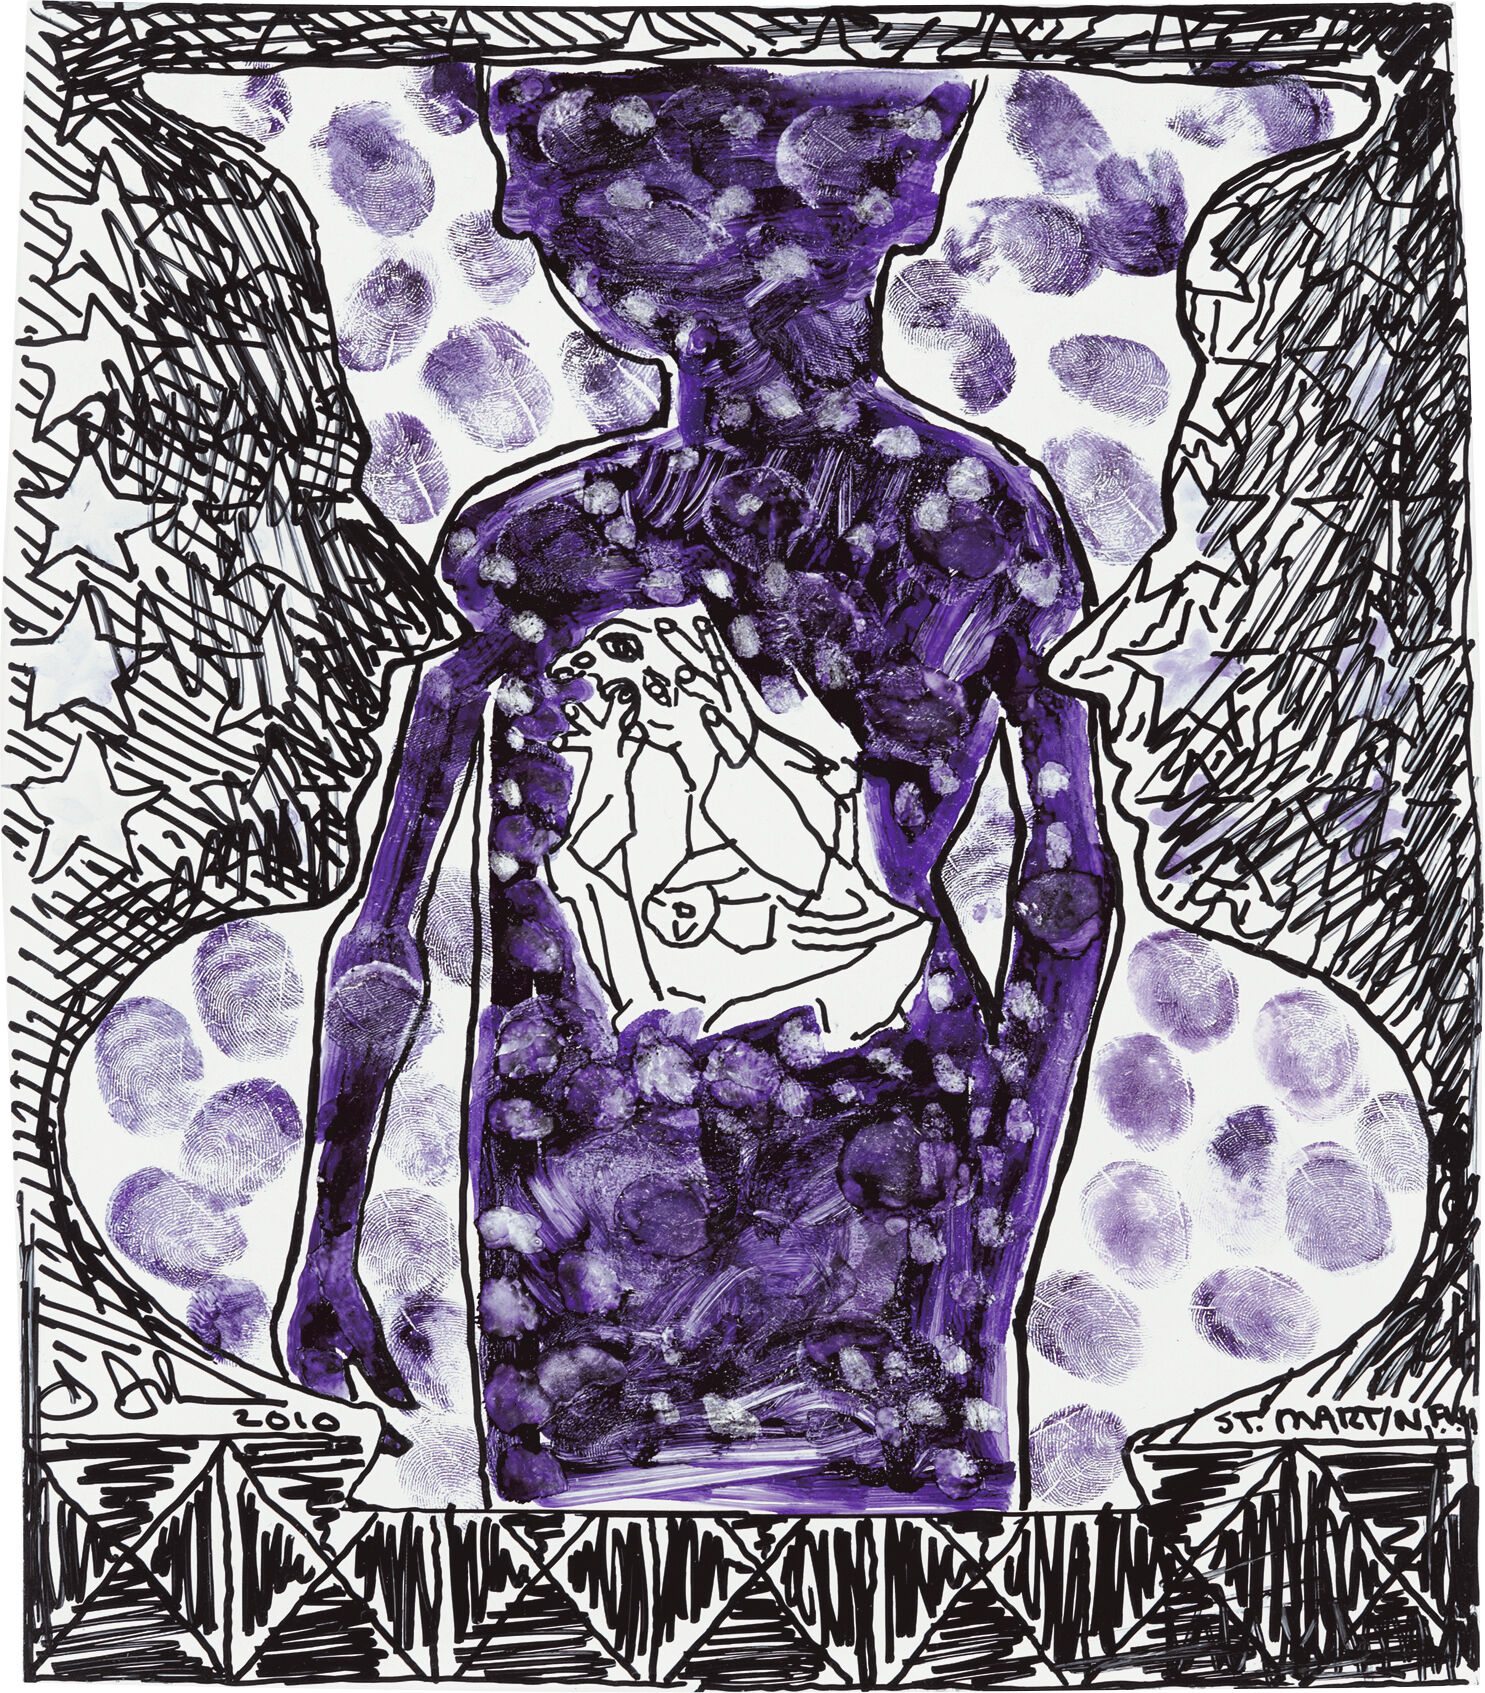 Black, purple, and white drawing dominated by the central figure of a torment crouched person inside the borders of a larger silhouette of a child, surrounded by purple fingerprints, scribbles, stars, and a geometric pattern along the bottom edge of the composition.